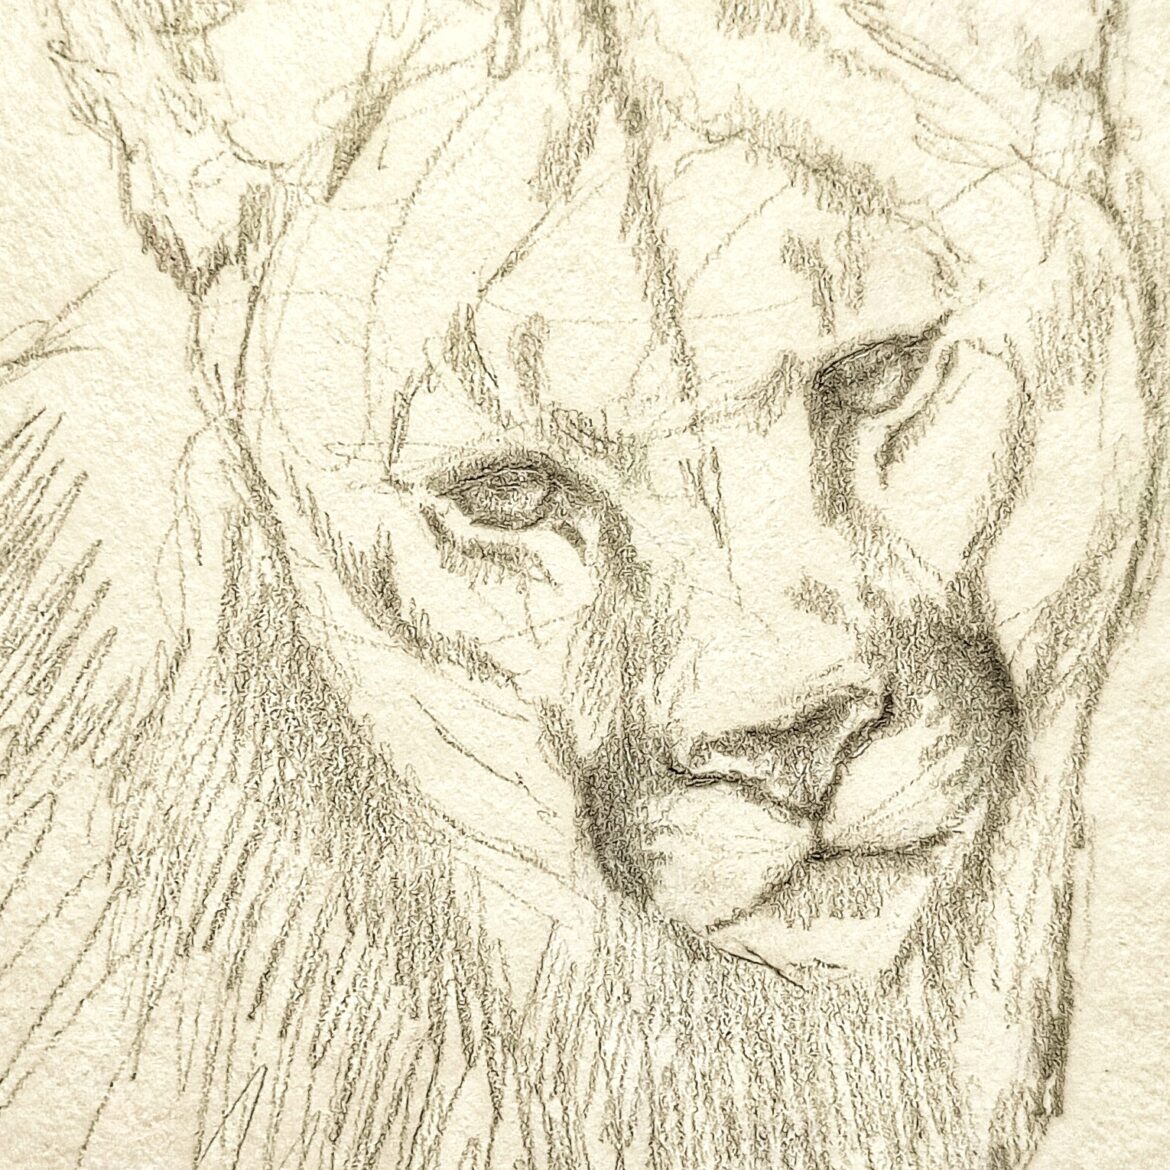 “Sketching the Essence: Capturing the Grace and Power of the Mountain Lion”